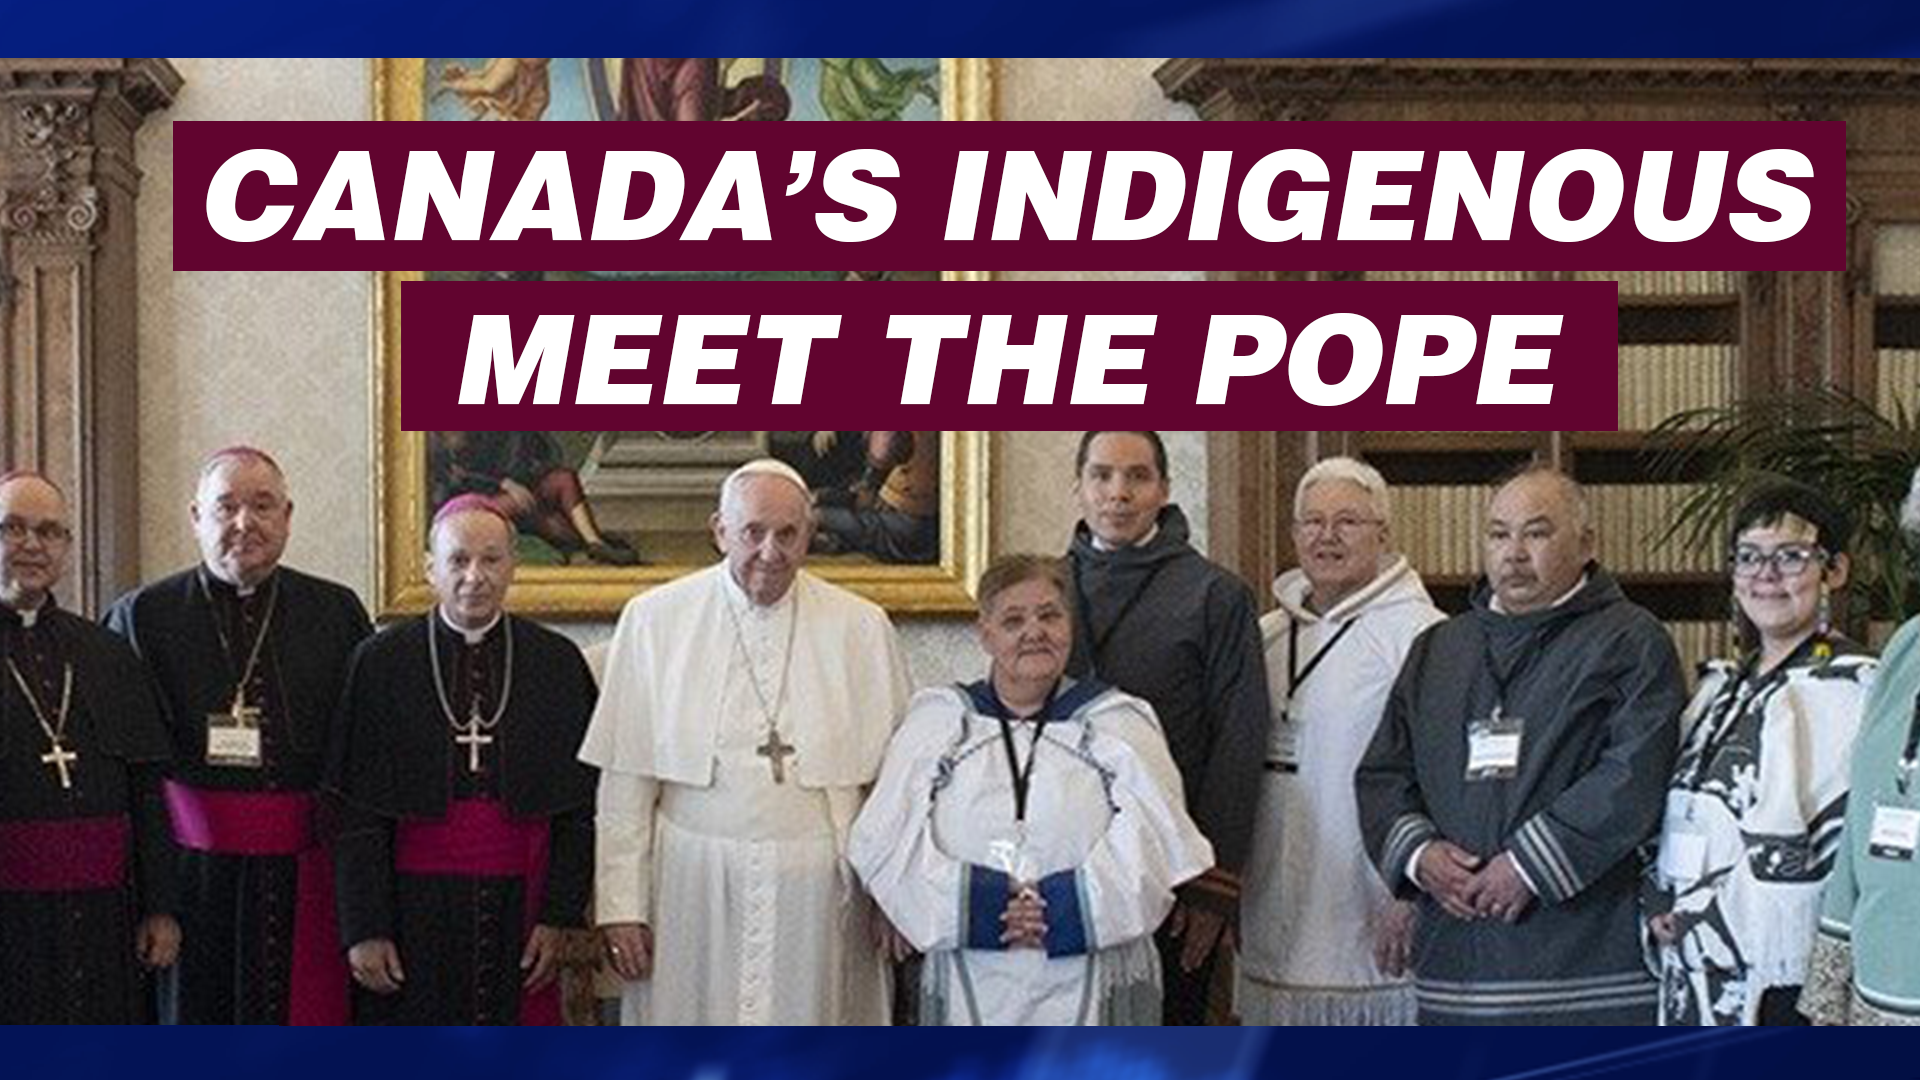 Canada's indigenous meets the Pope